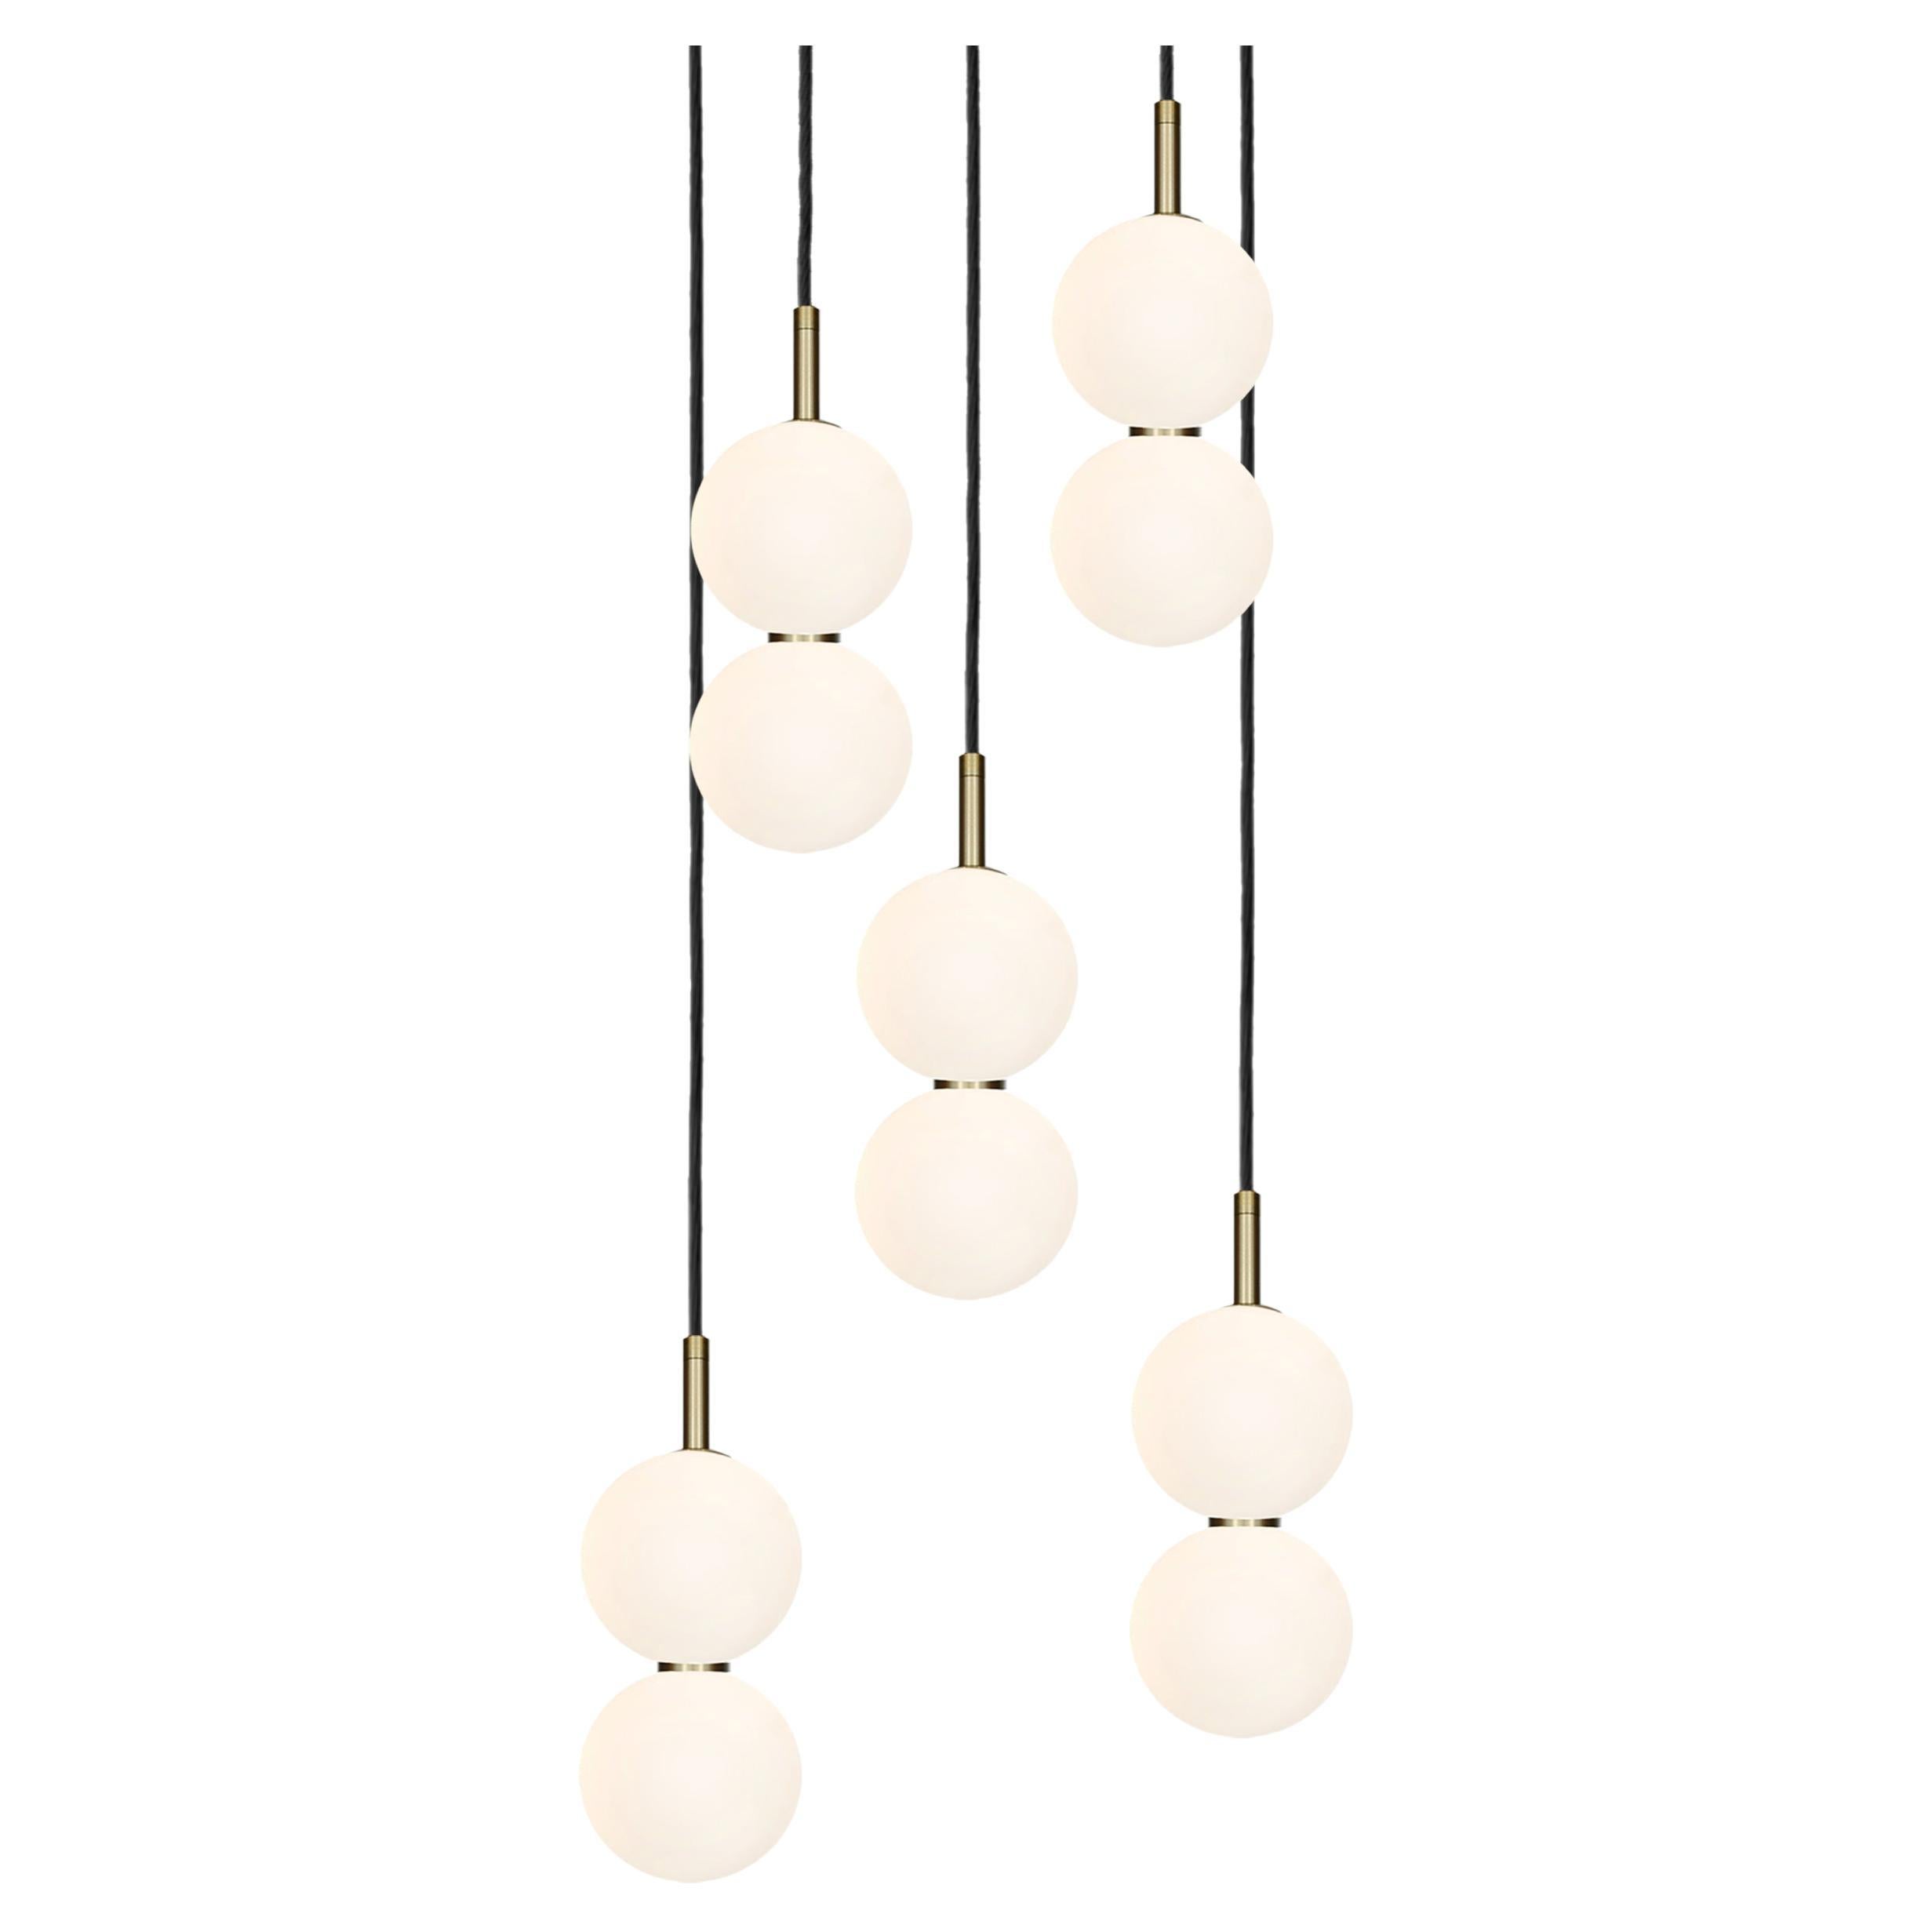 Echo Lamp Cluster, 5-Piece. Opal Glass Orbs, Brass Metalwork. Integrated LED